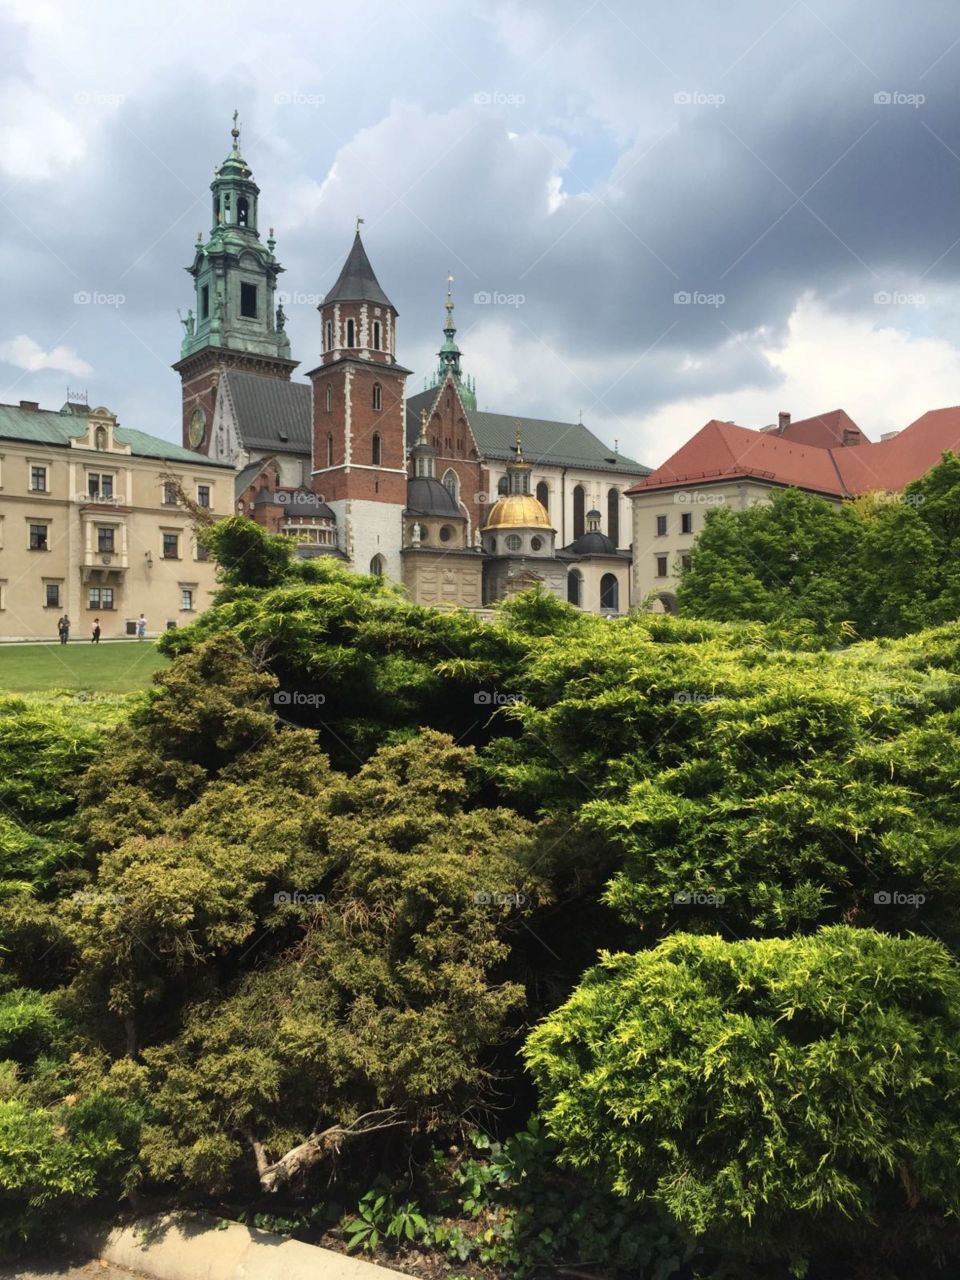 A gorgeous view of a cathedral in the grounds of Wawel Castle, Kraków.